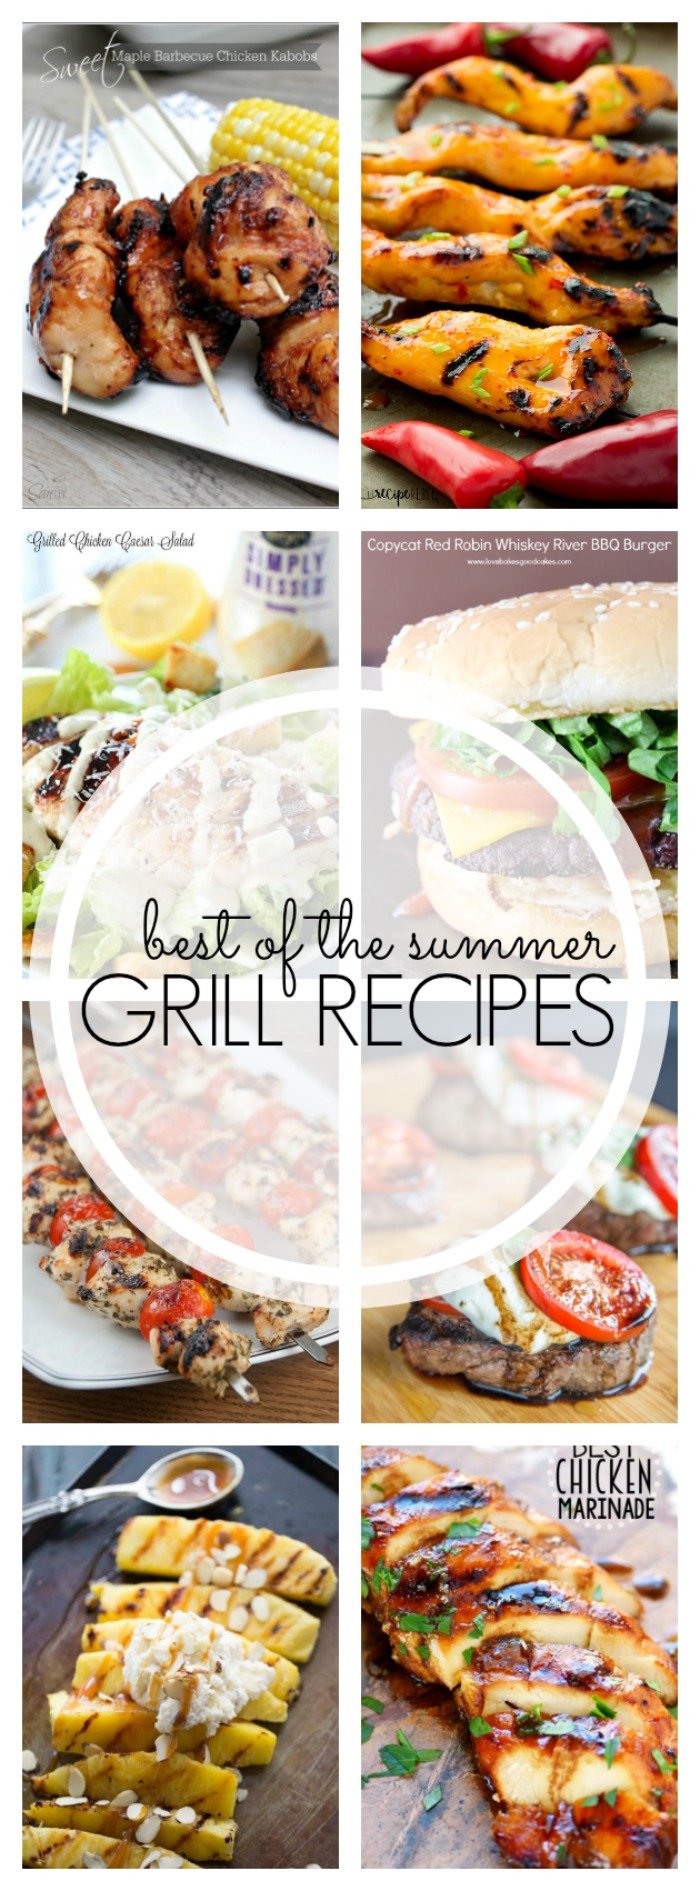 Best Summer Grill Recipes to feed the masses.